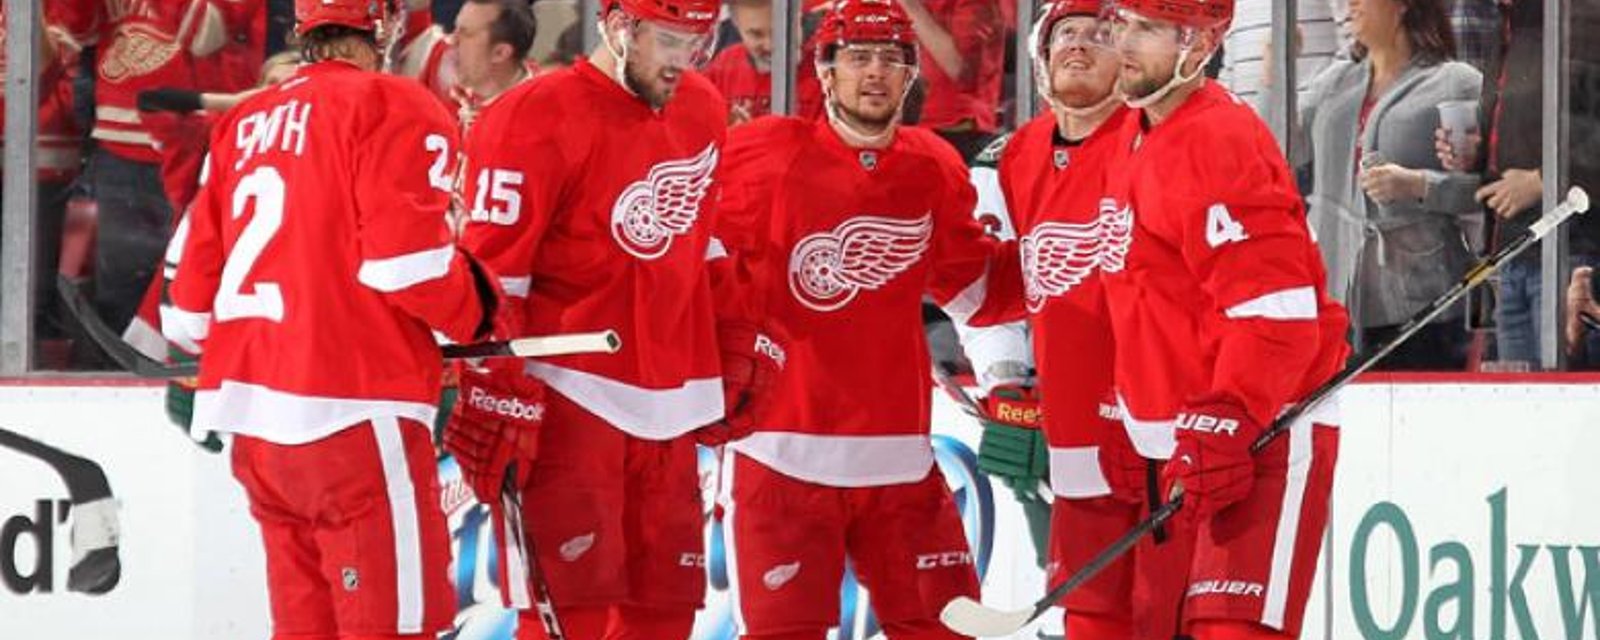 Will Martin Frk finally get his shot with the Red Wings?